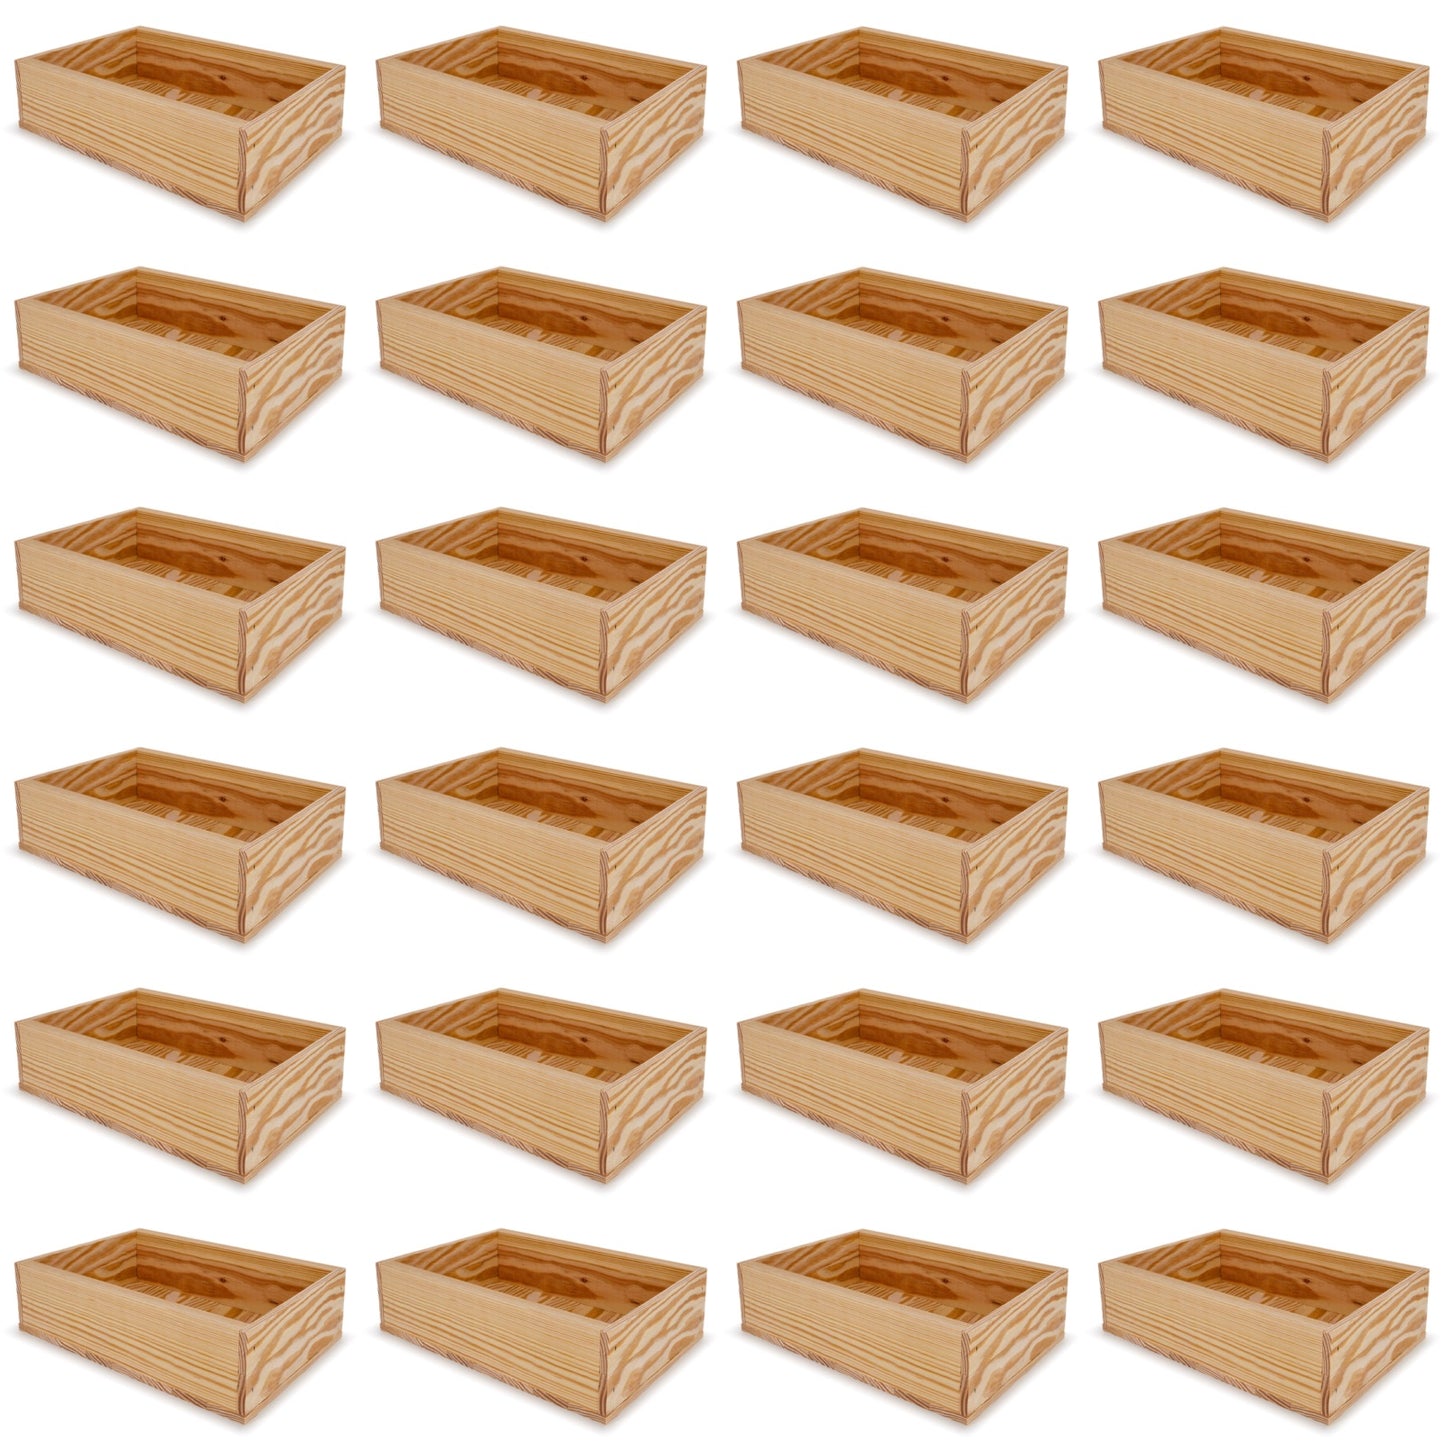 24 Small wooden crates 8x13.25x3.5